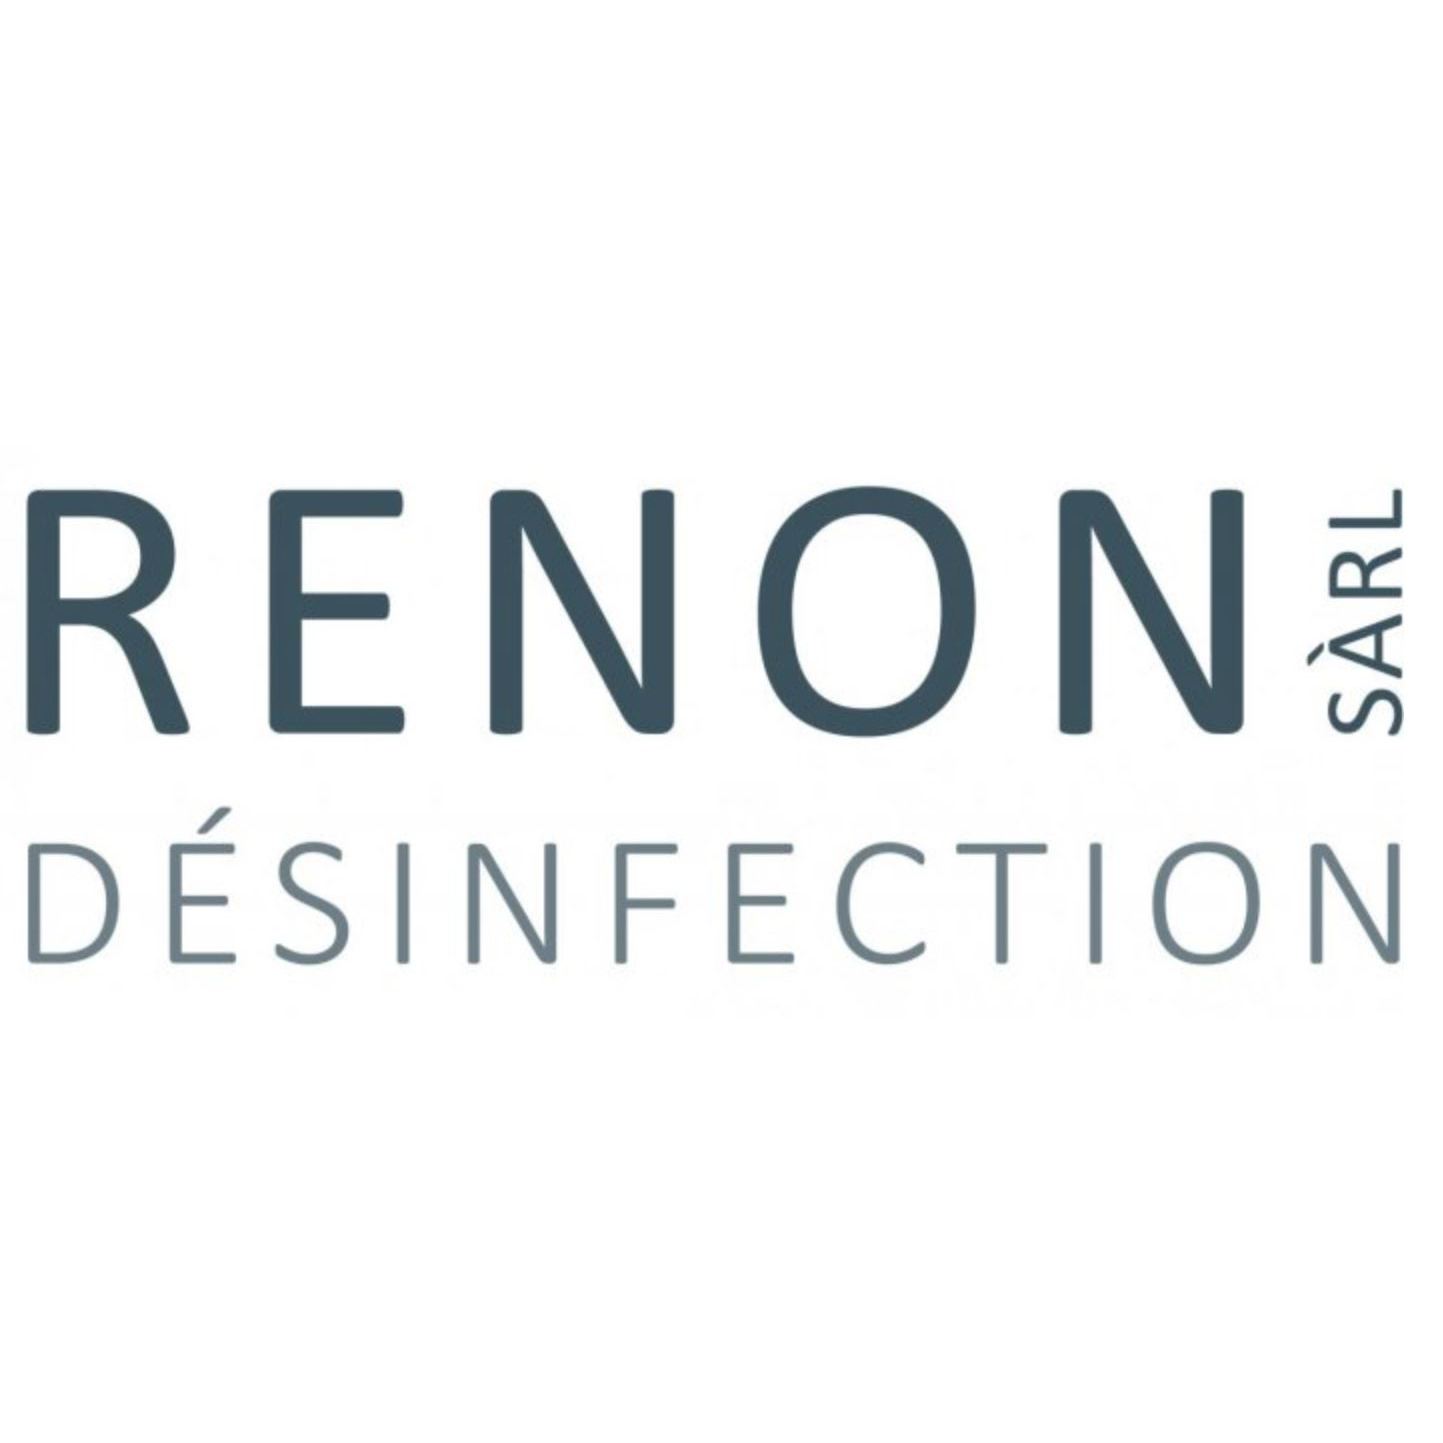 Renon Désinfection SA - Pharmacy - Fribourg - 026 660 26 25 Switzerland | ShowMeLocal.com